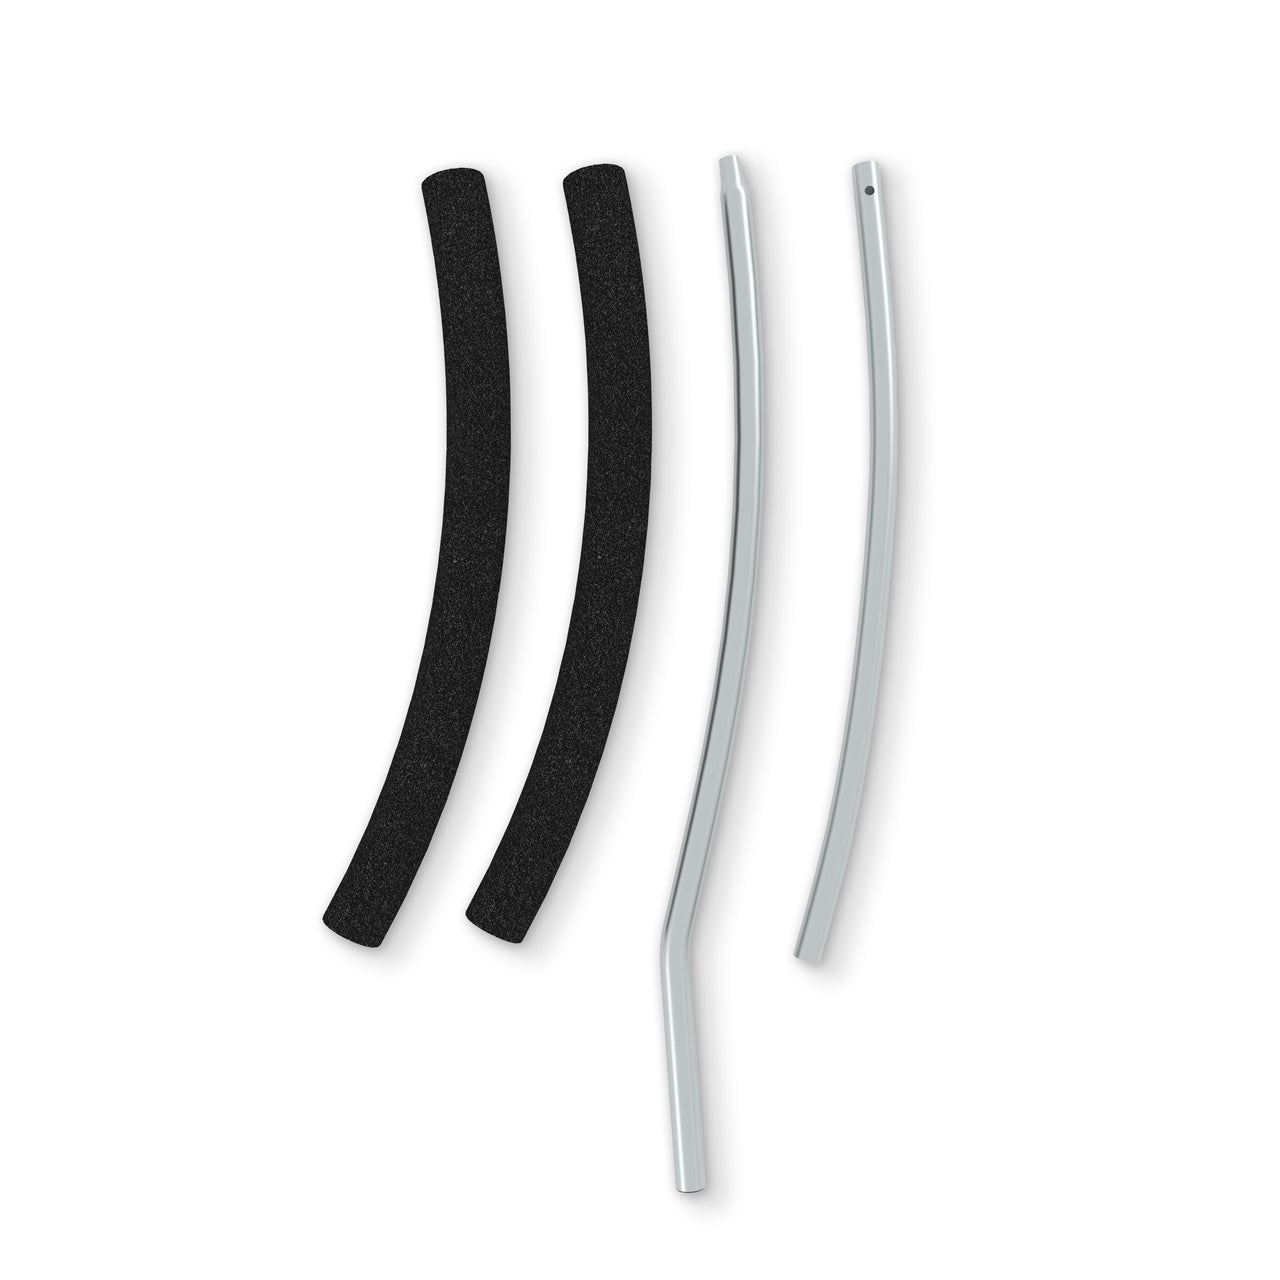 Parts for 12FT Jumpzylla Curved Pole Trampolines, 12FT